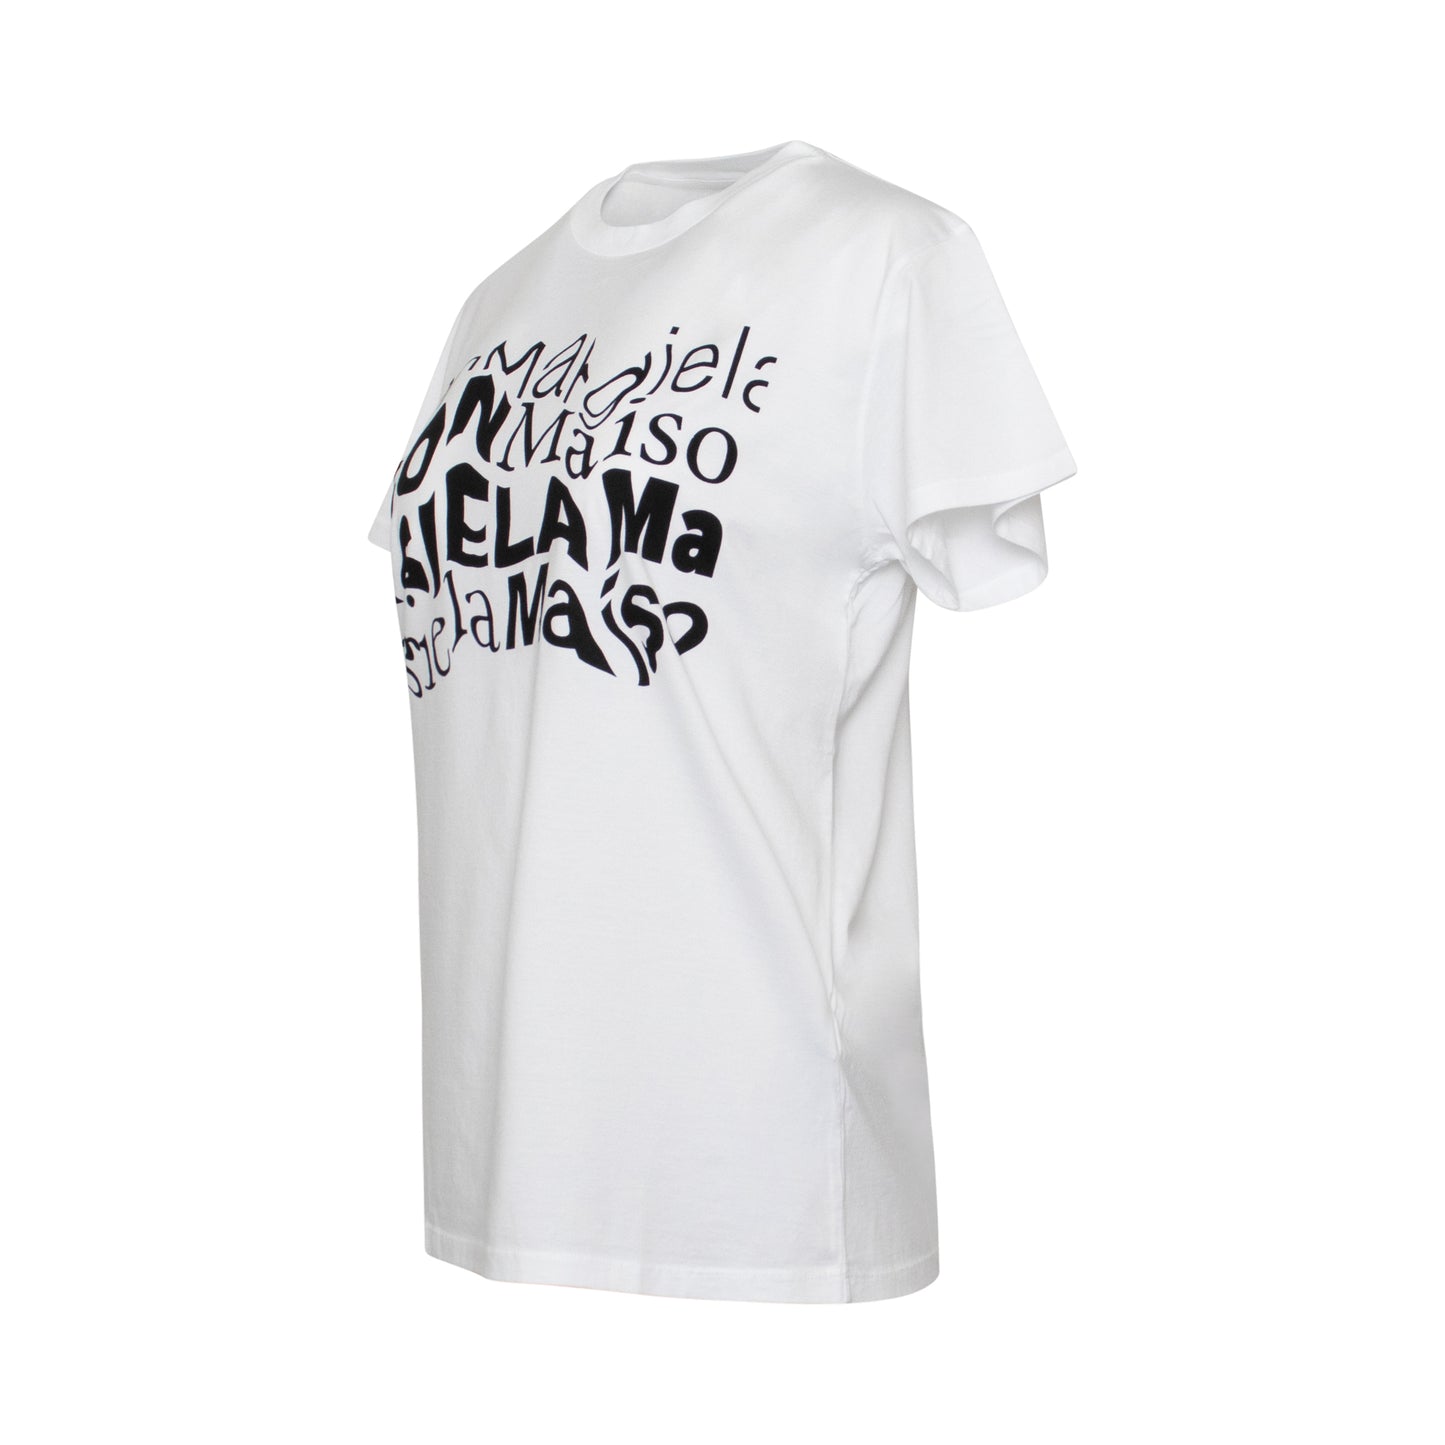 Distorted Logo T-Shirt in White